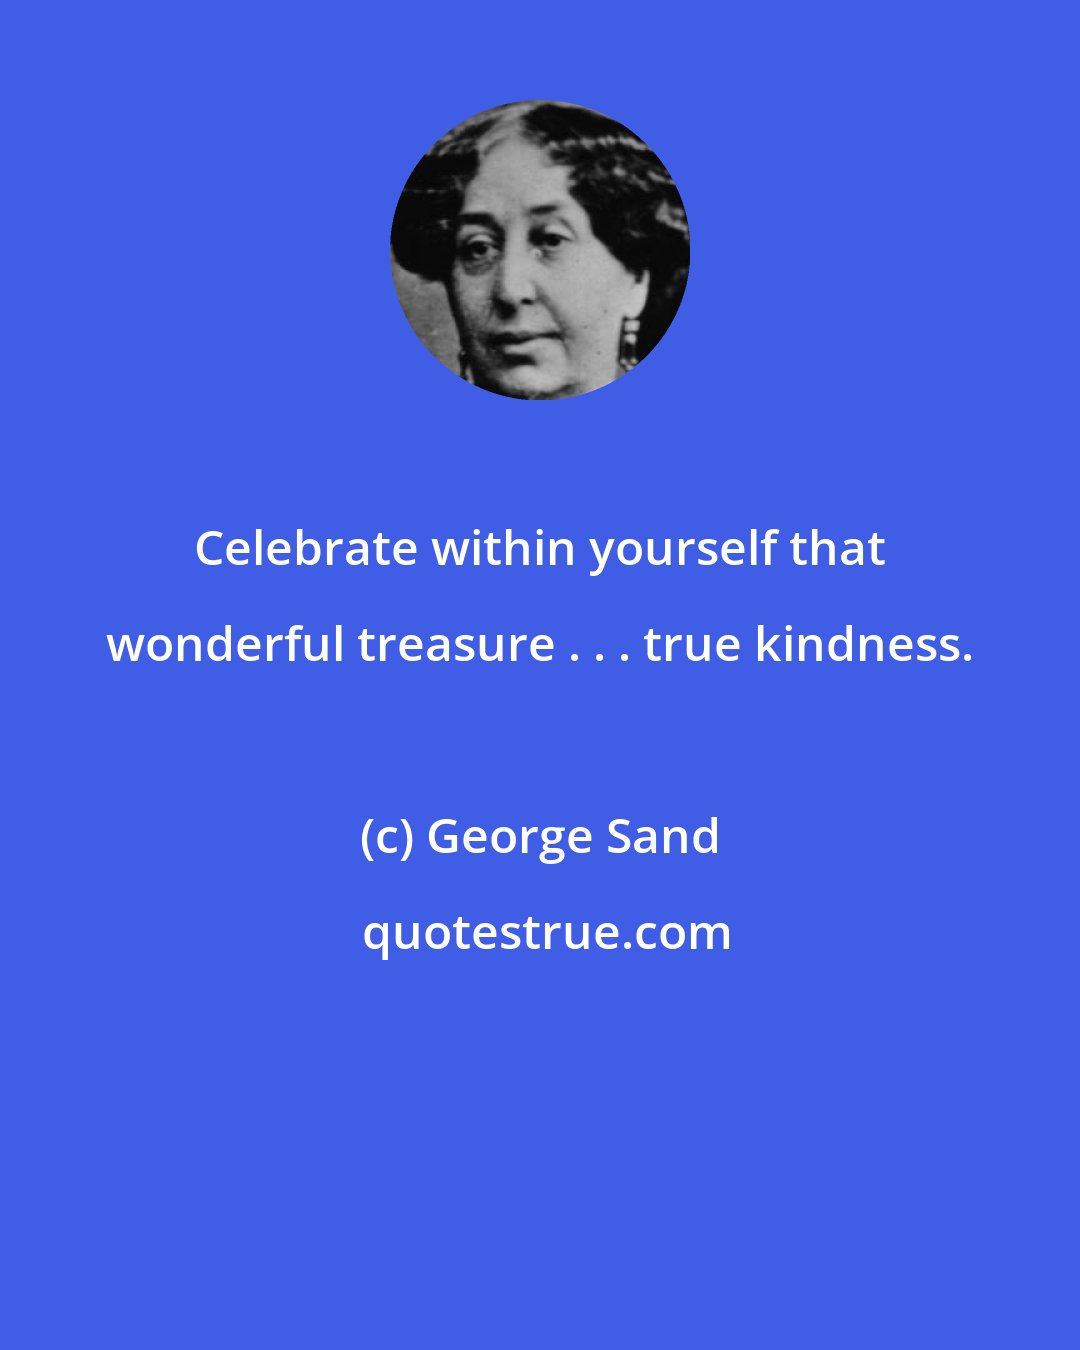 George Sand: Celebrate within yourself that wonderful treasure . . . true kindness.